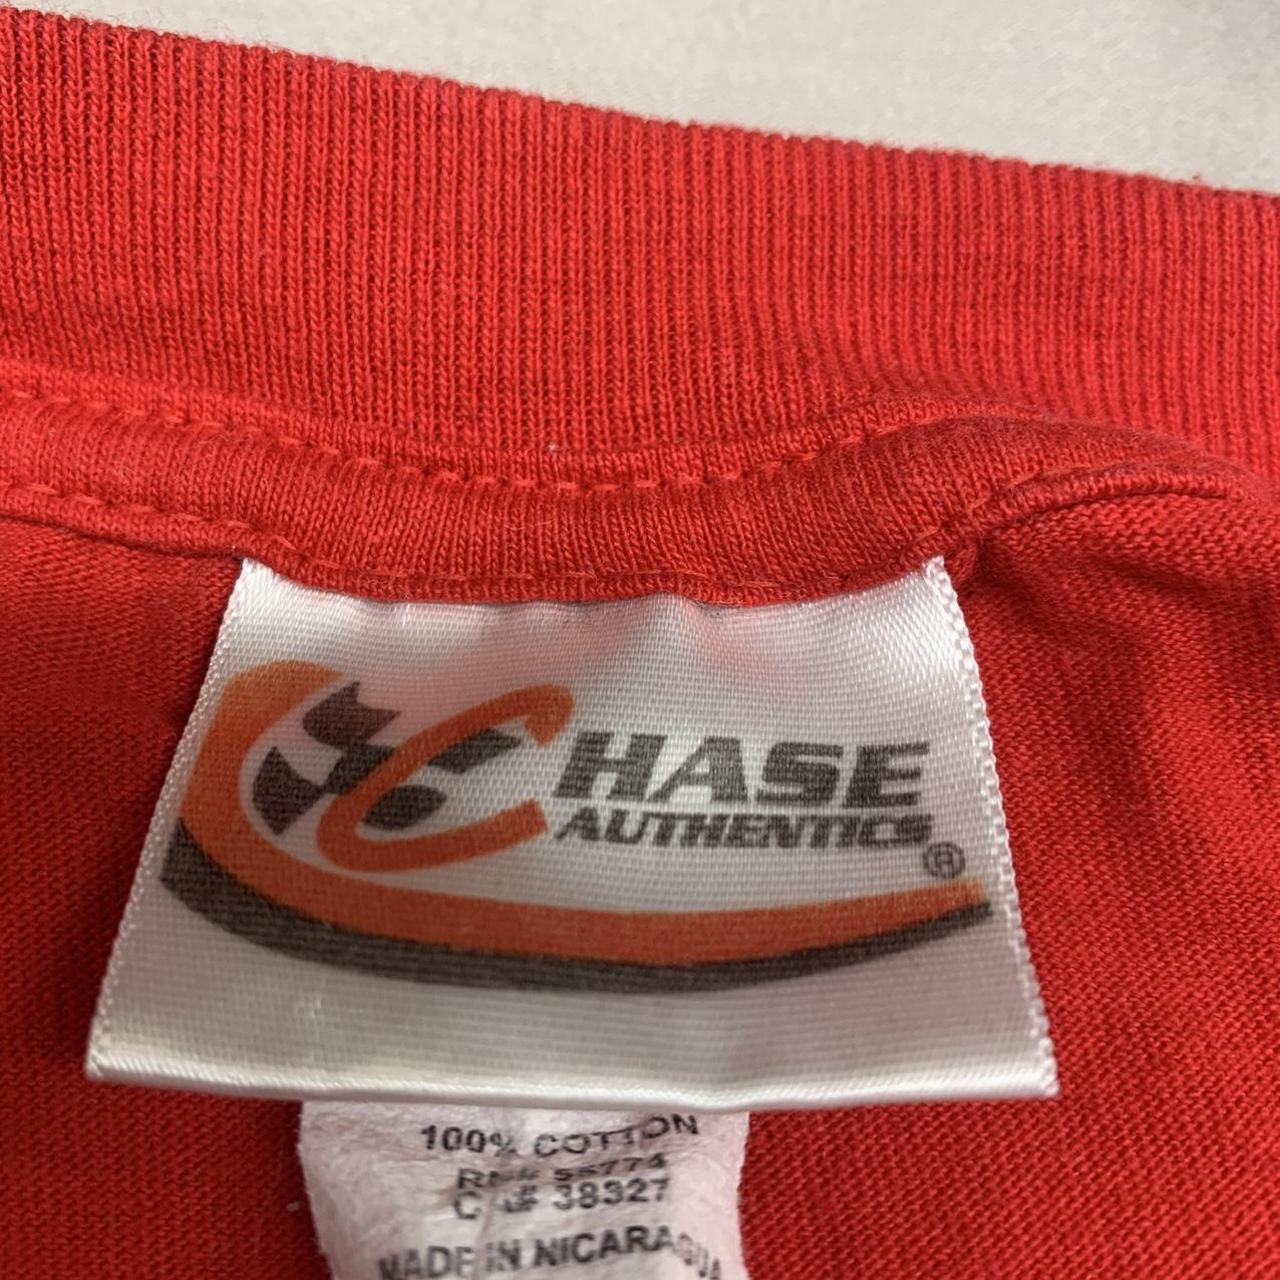 Chase Authentics Men's Red and White T-shirt | Depop